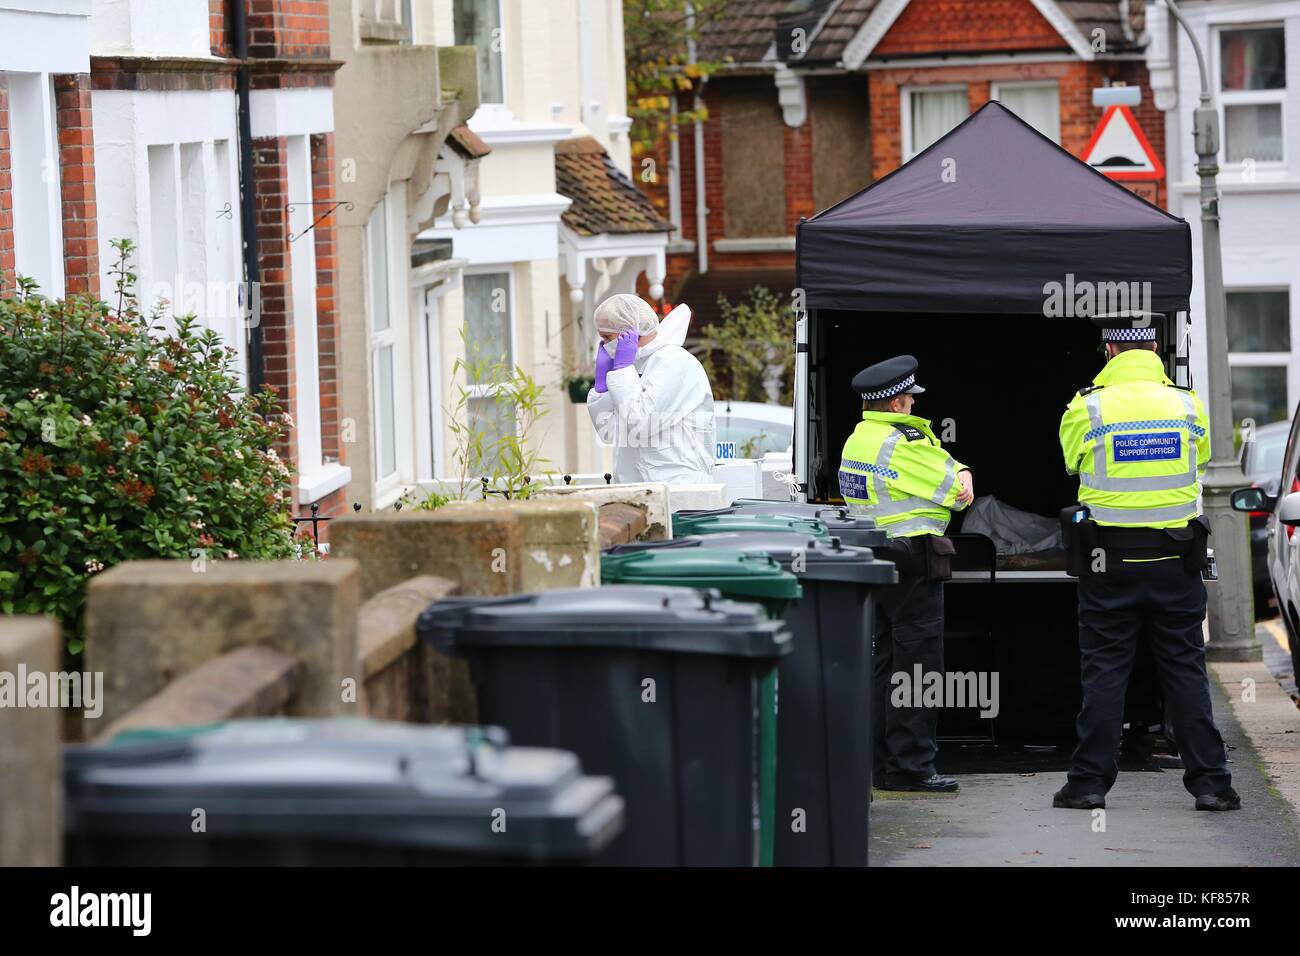 Brighton, UK. 26th October, 2017. Police Scene of Crime Officer enter 8 Sandgate Road, Brighton where Jillian Howell 46 was brutally stabbed to death last night. Her work colleage Dave Browning 51 has been charged with her murder and is awaiting trial. Stock Photo